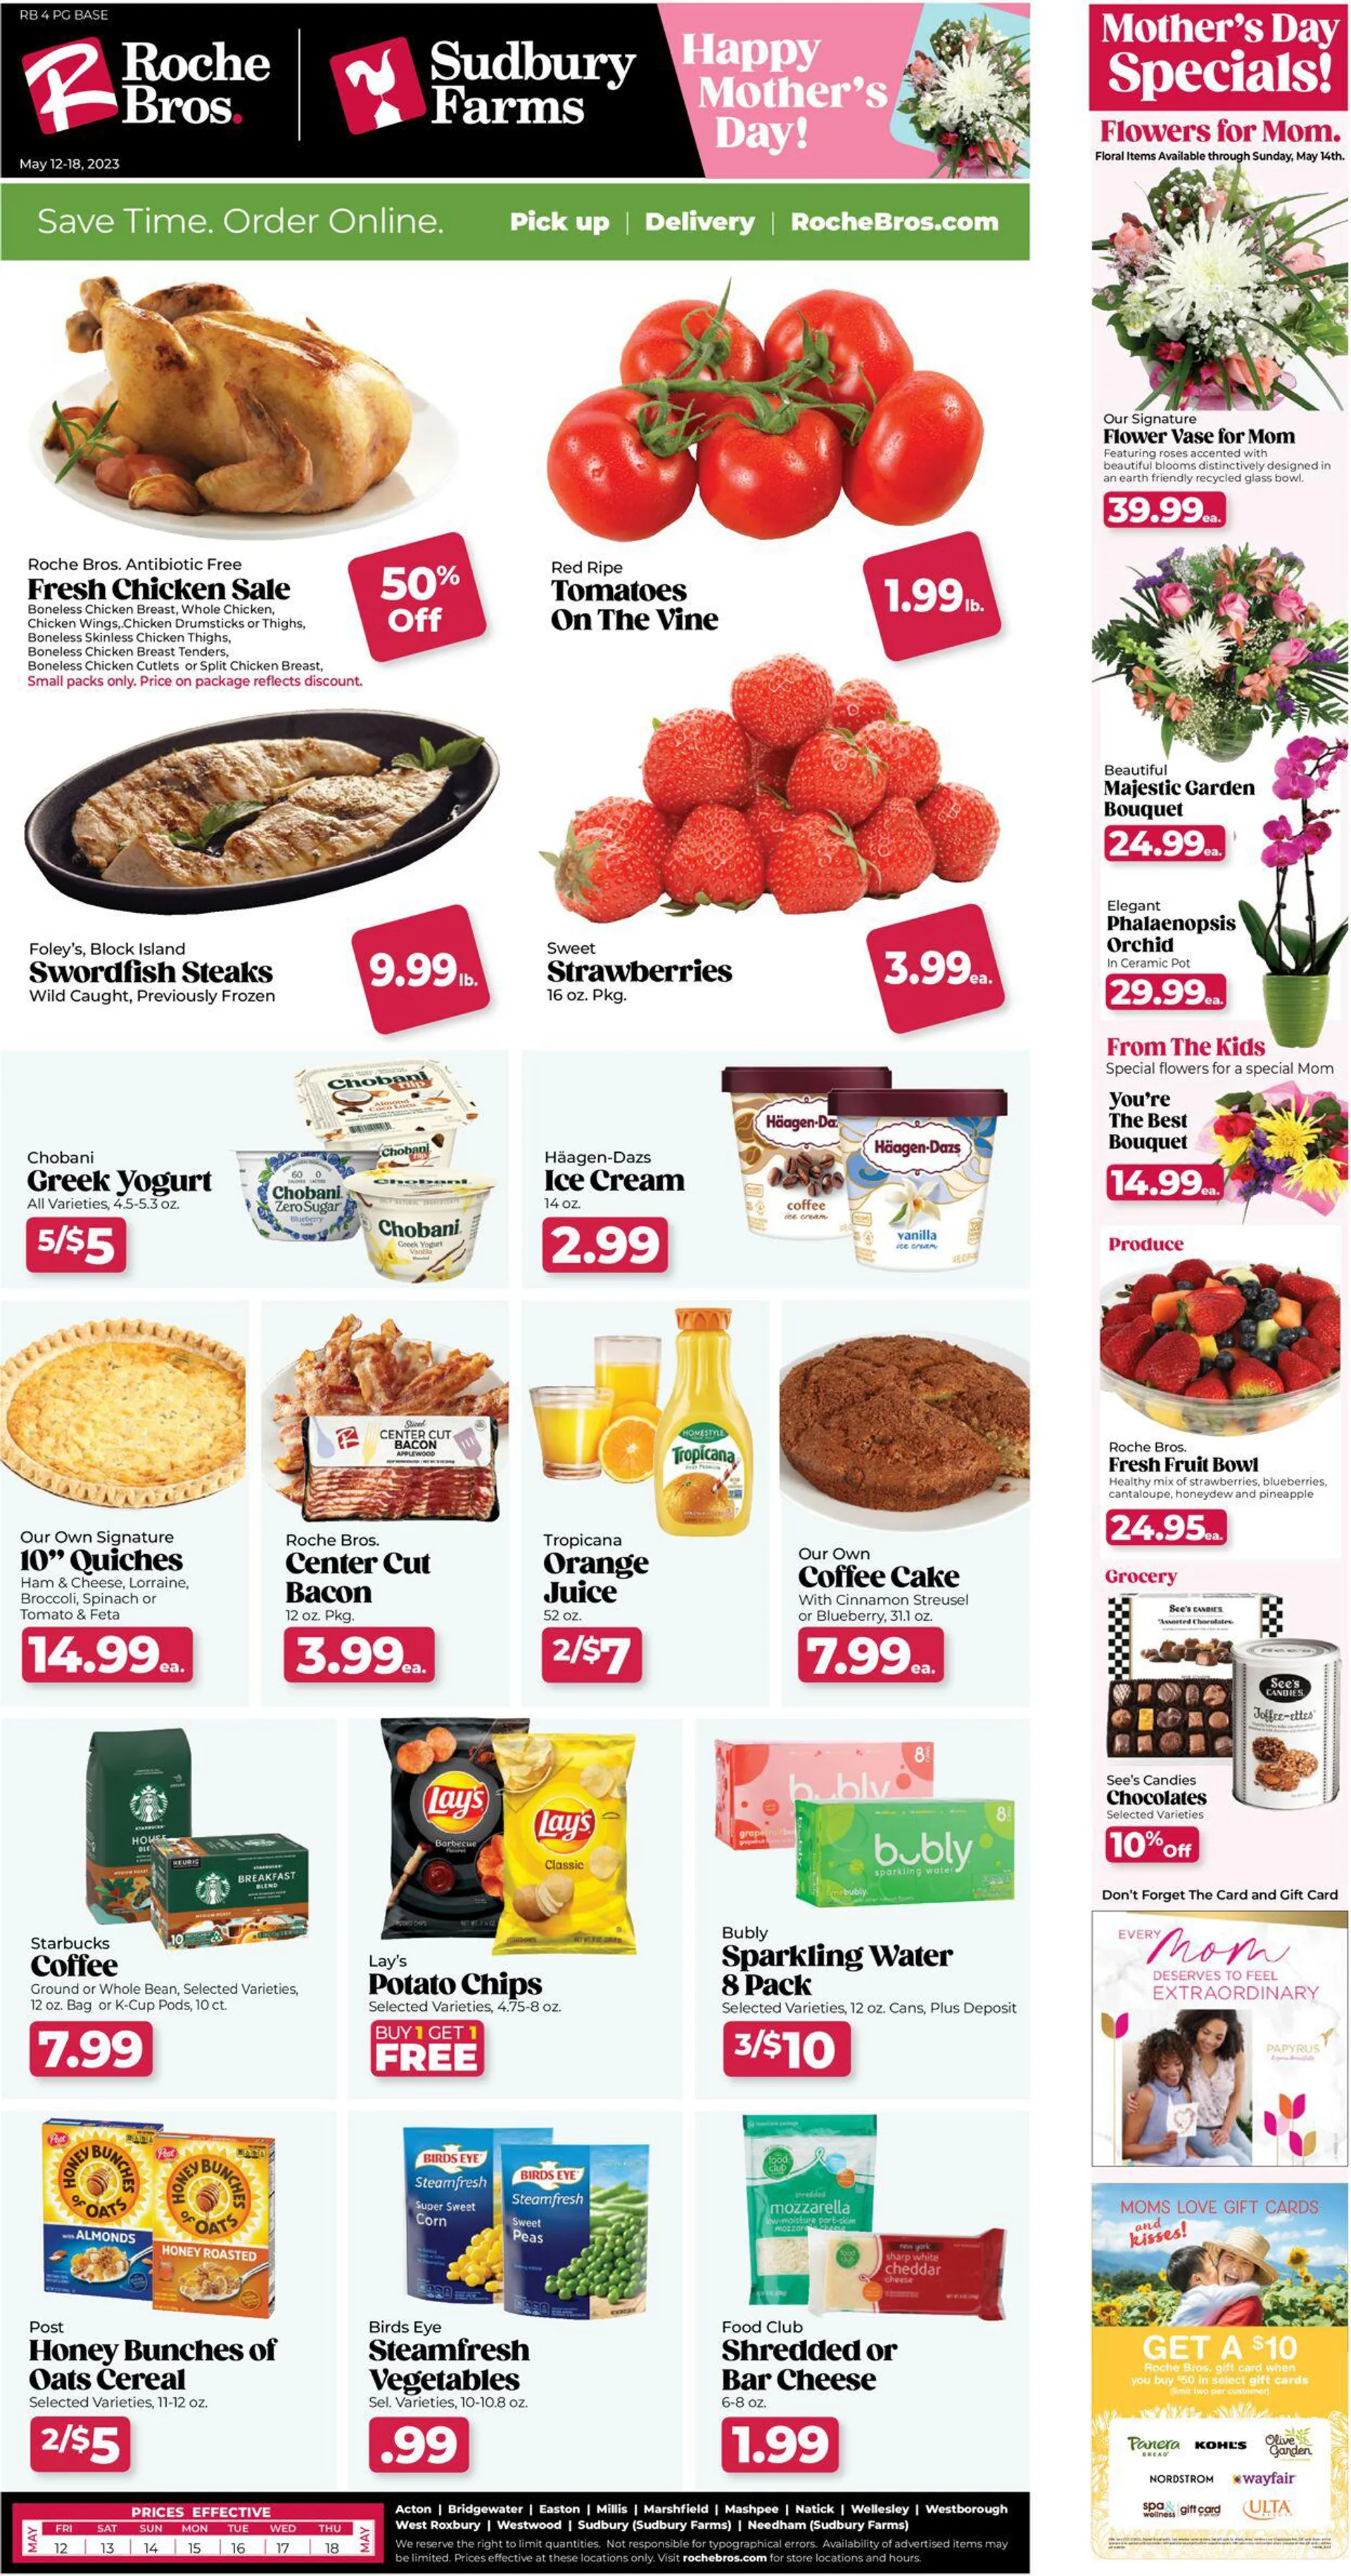 Roche Bros. Supermarkets Current weekly ad - 1